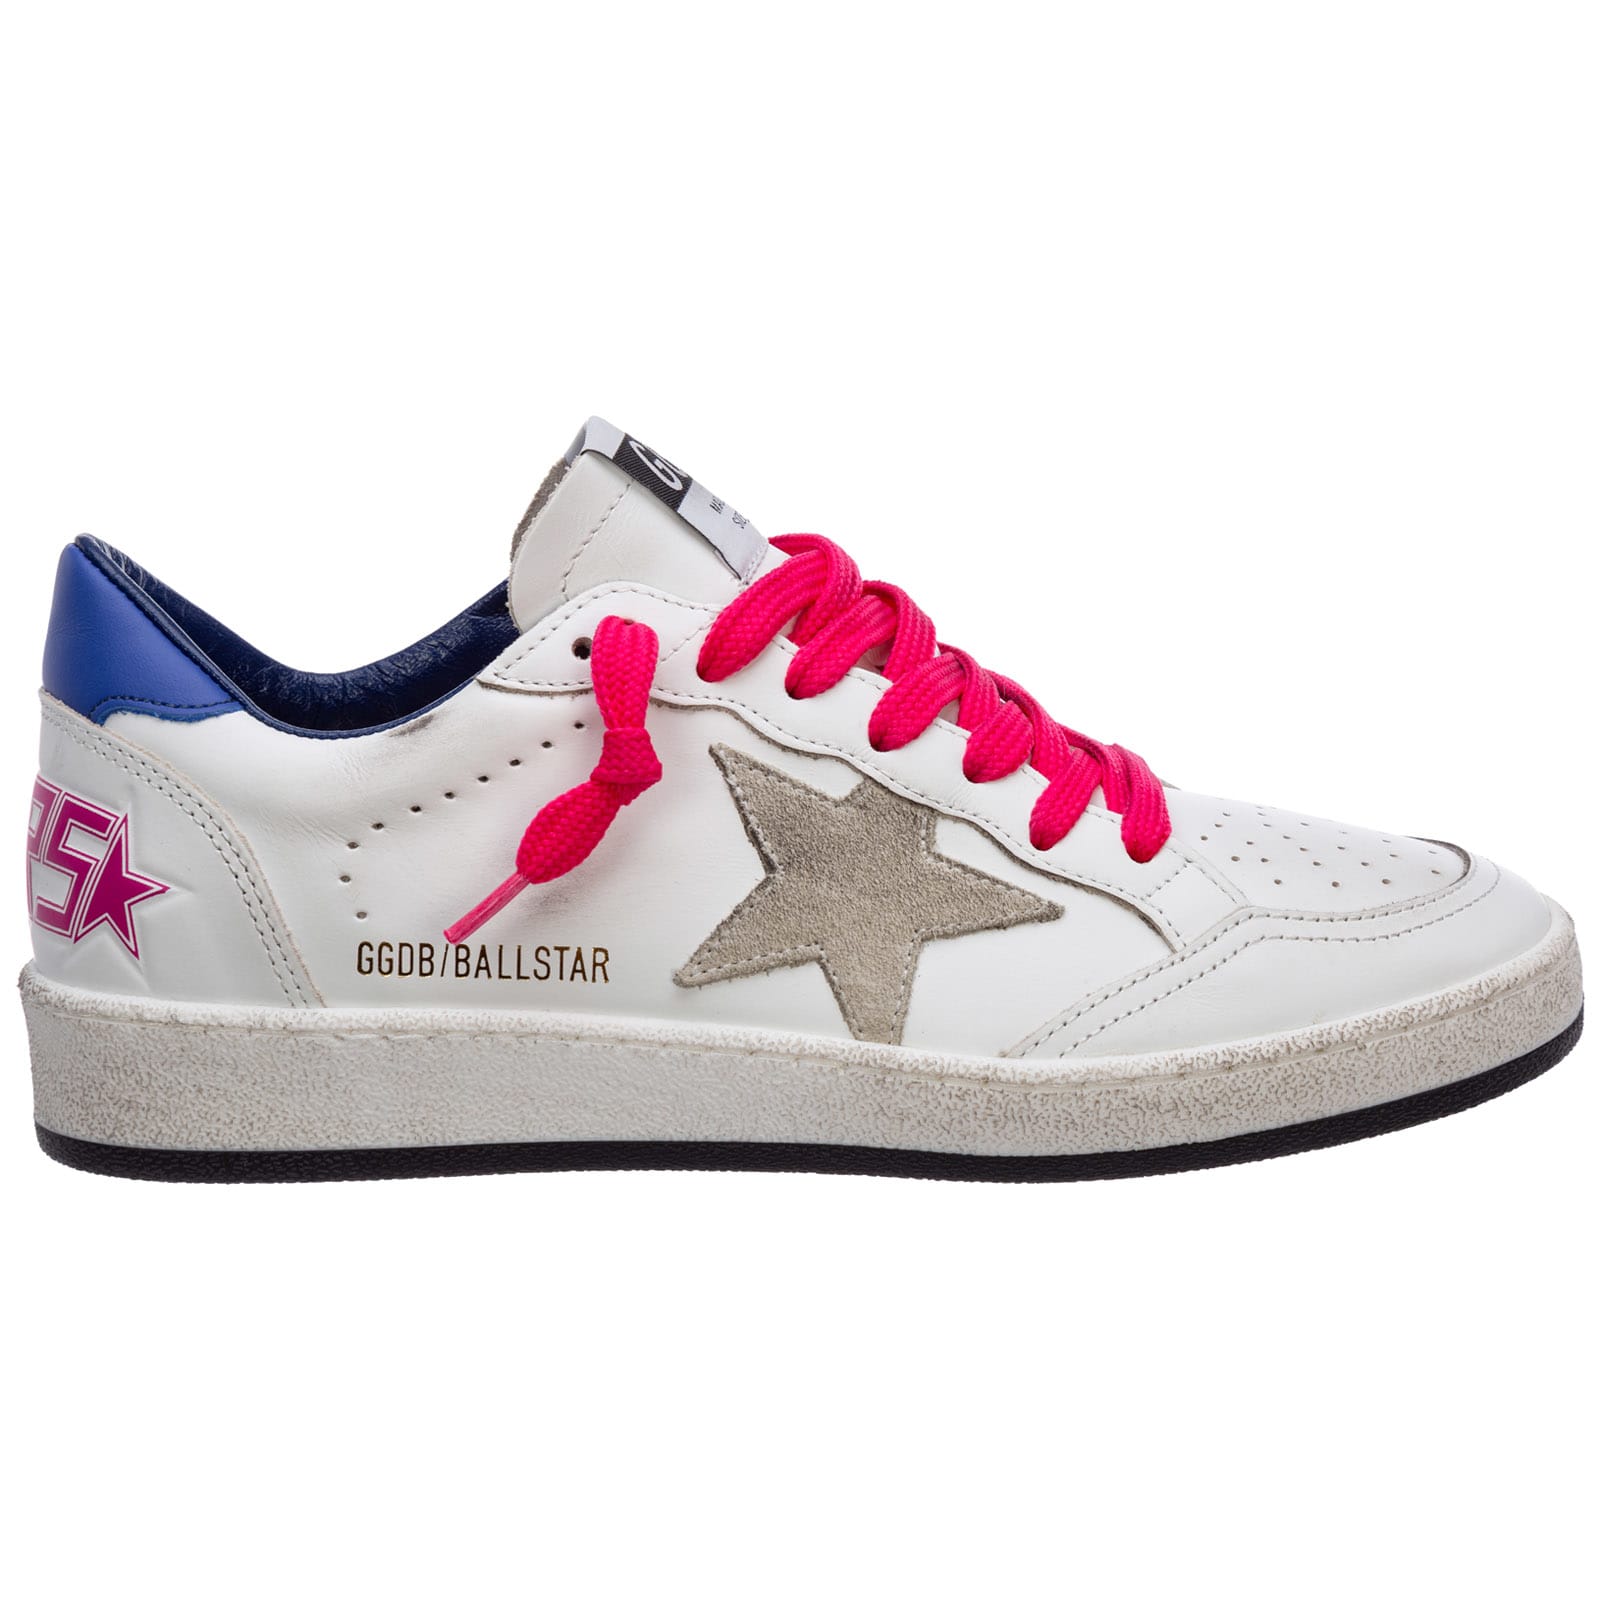 GOLDEN GOOSE BALL STAR SNEAKERS,GWF00117.F001904.10419